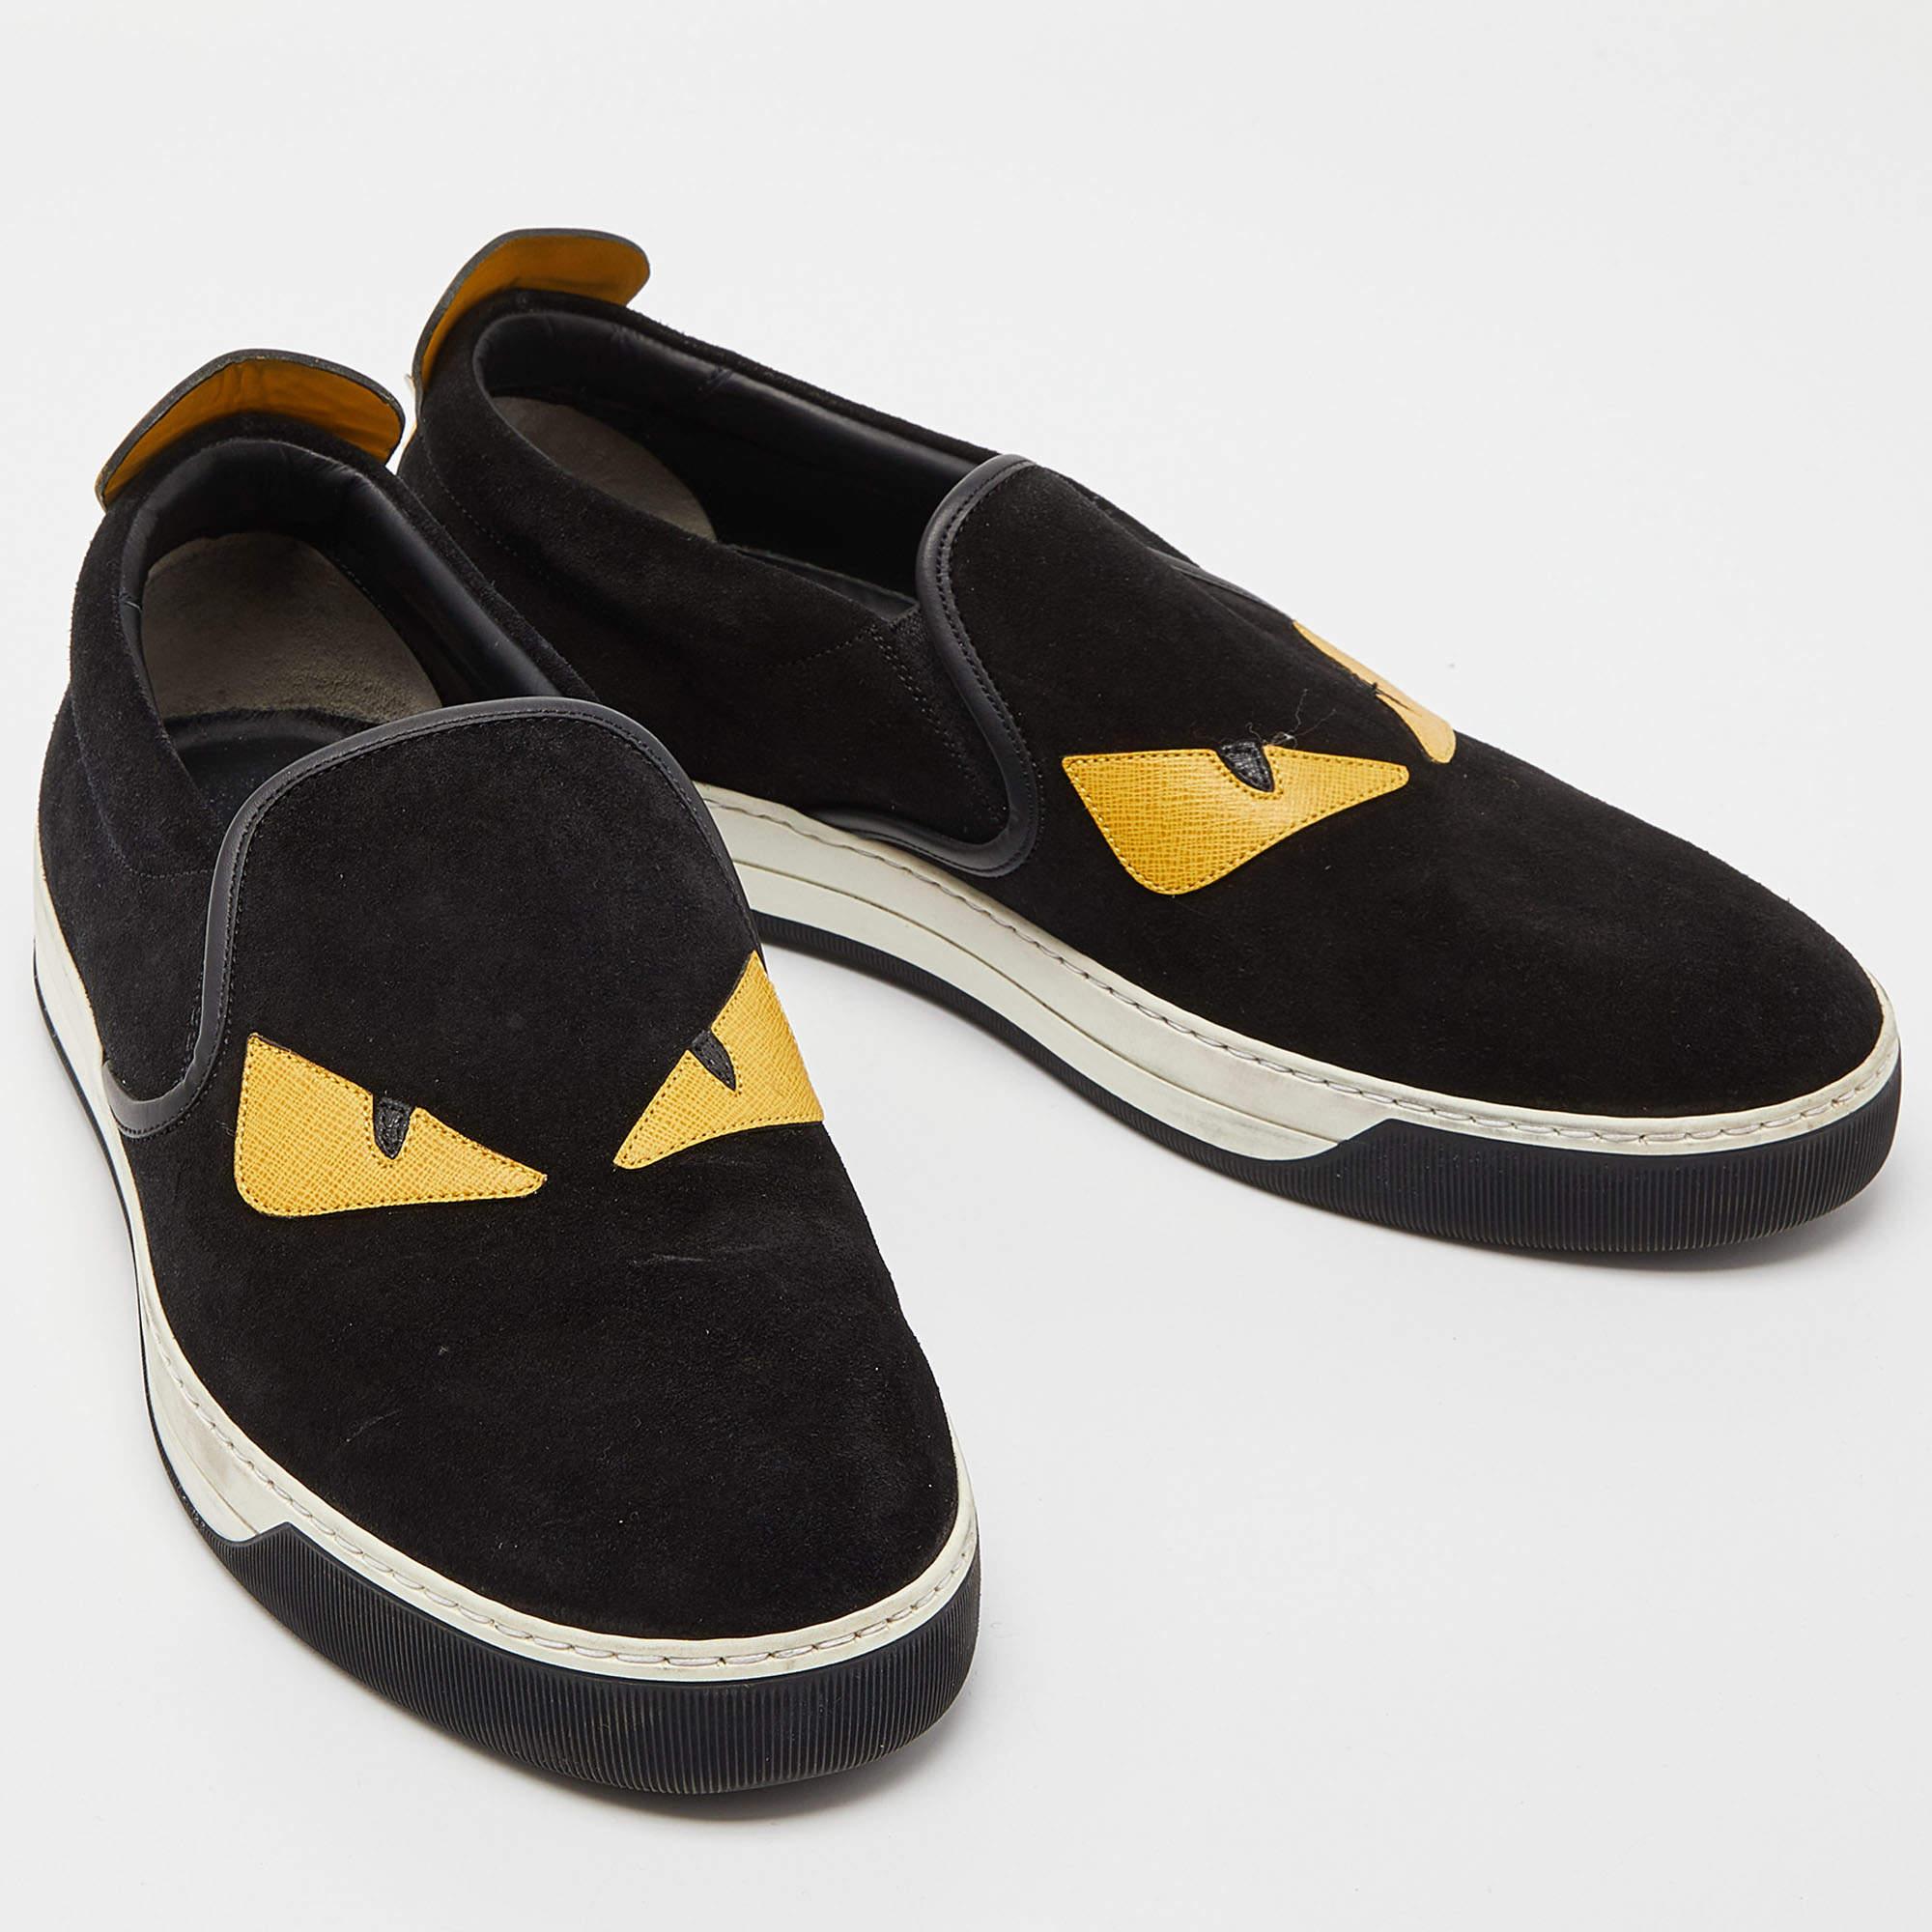 Fendi Black/Yellow Suede and Leather Monster Eyes Slip On Sneakers Size 44 1